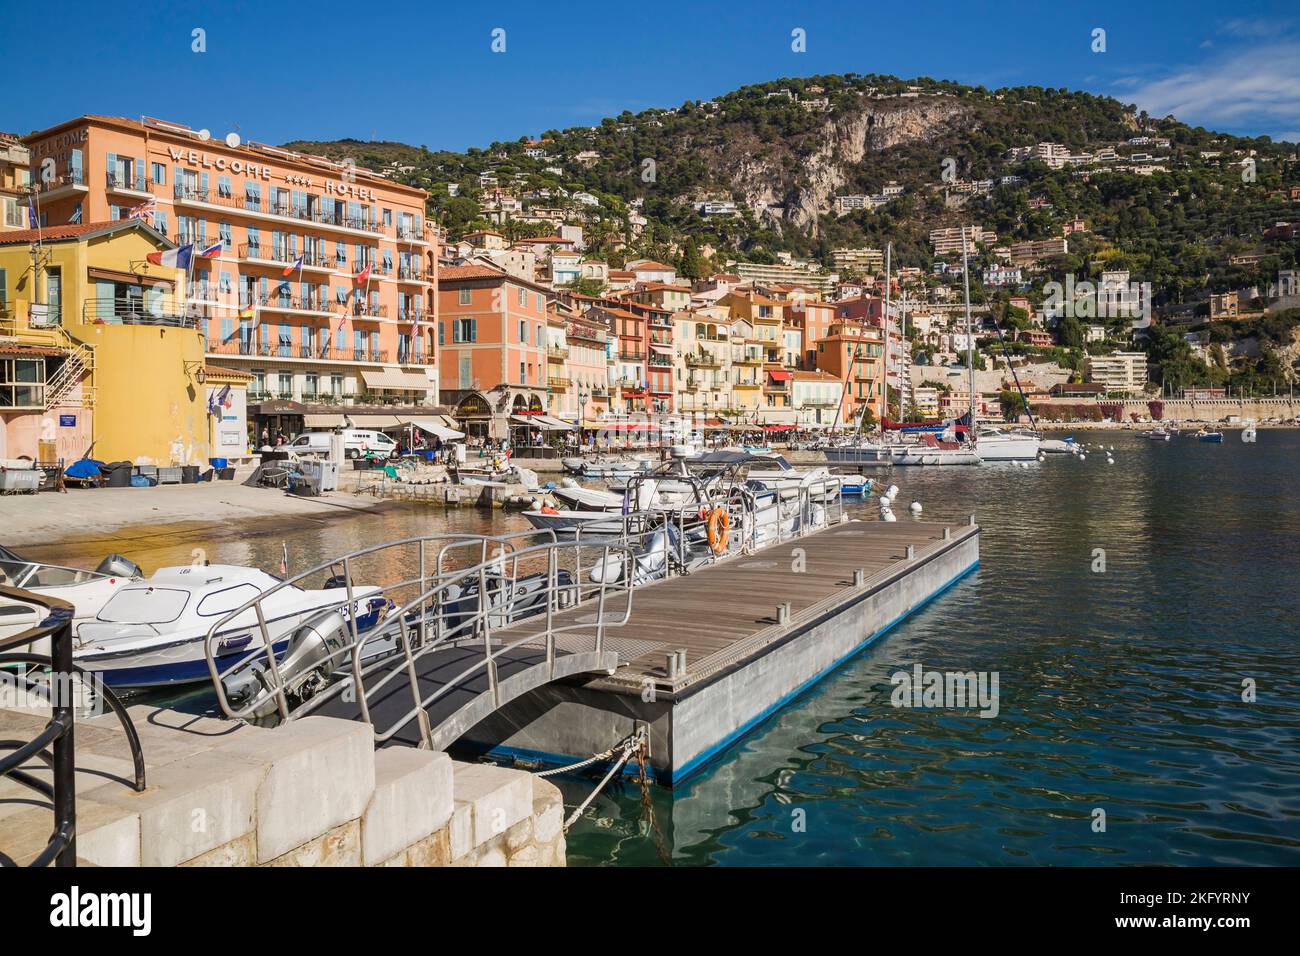 Colourful hotel and apartment building facades and harbour with moored pleasure boats and sailboats, Villefranche-sur-Mer, Provence, France Stock Photo